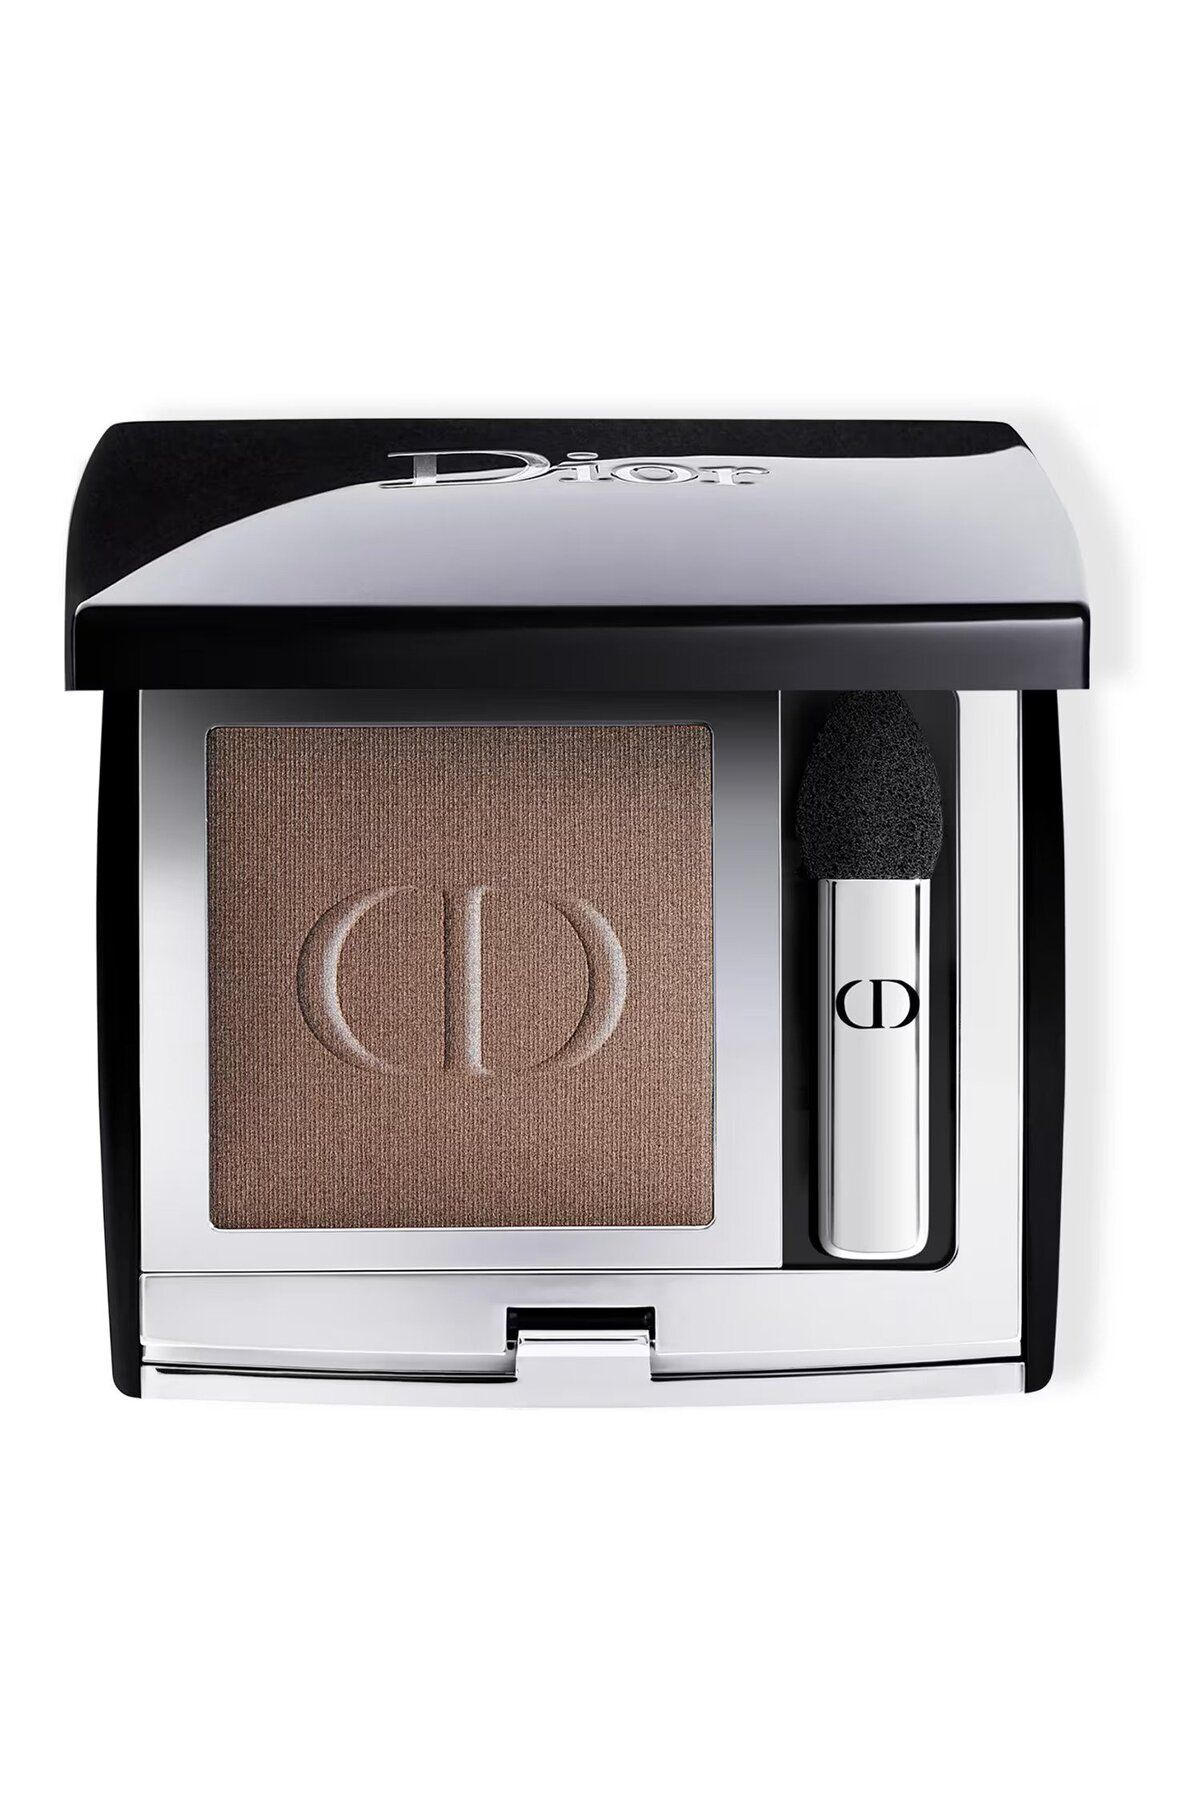 Dior MONO COULEUR COUTURE - ALOE VERA AND PİNE OİL-EYESHADOW THAT PLUMPS THE EYEBROWS 2 GR PSSN2099